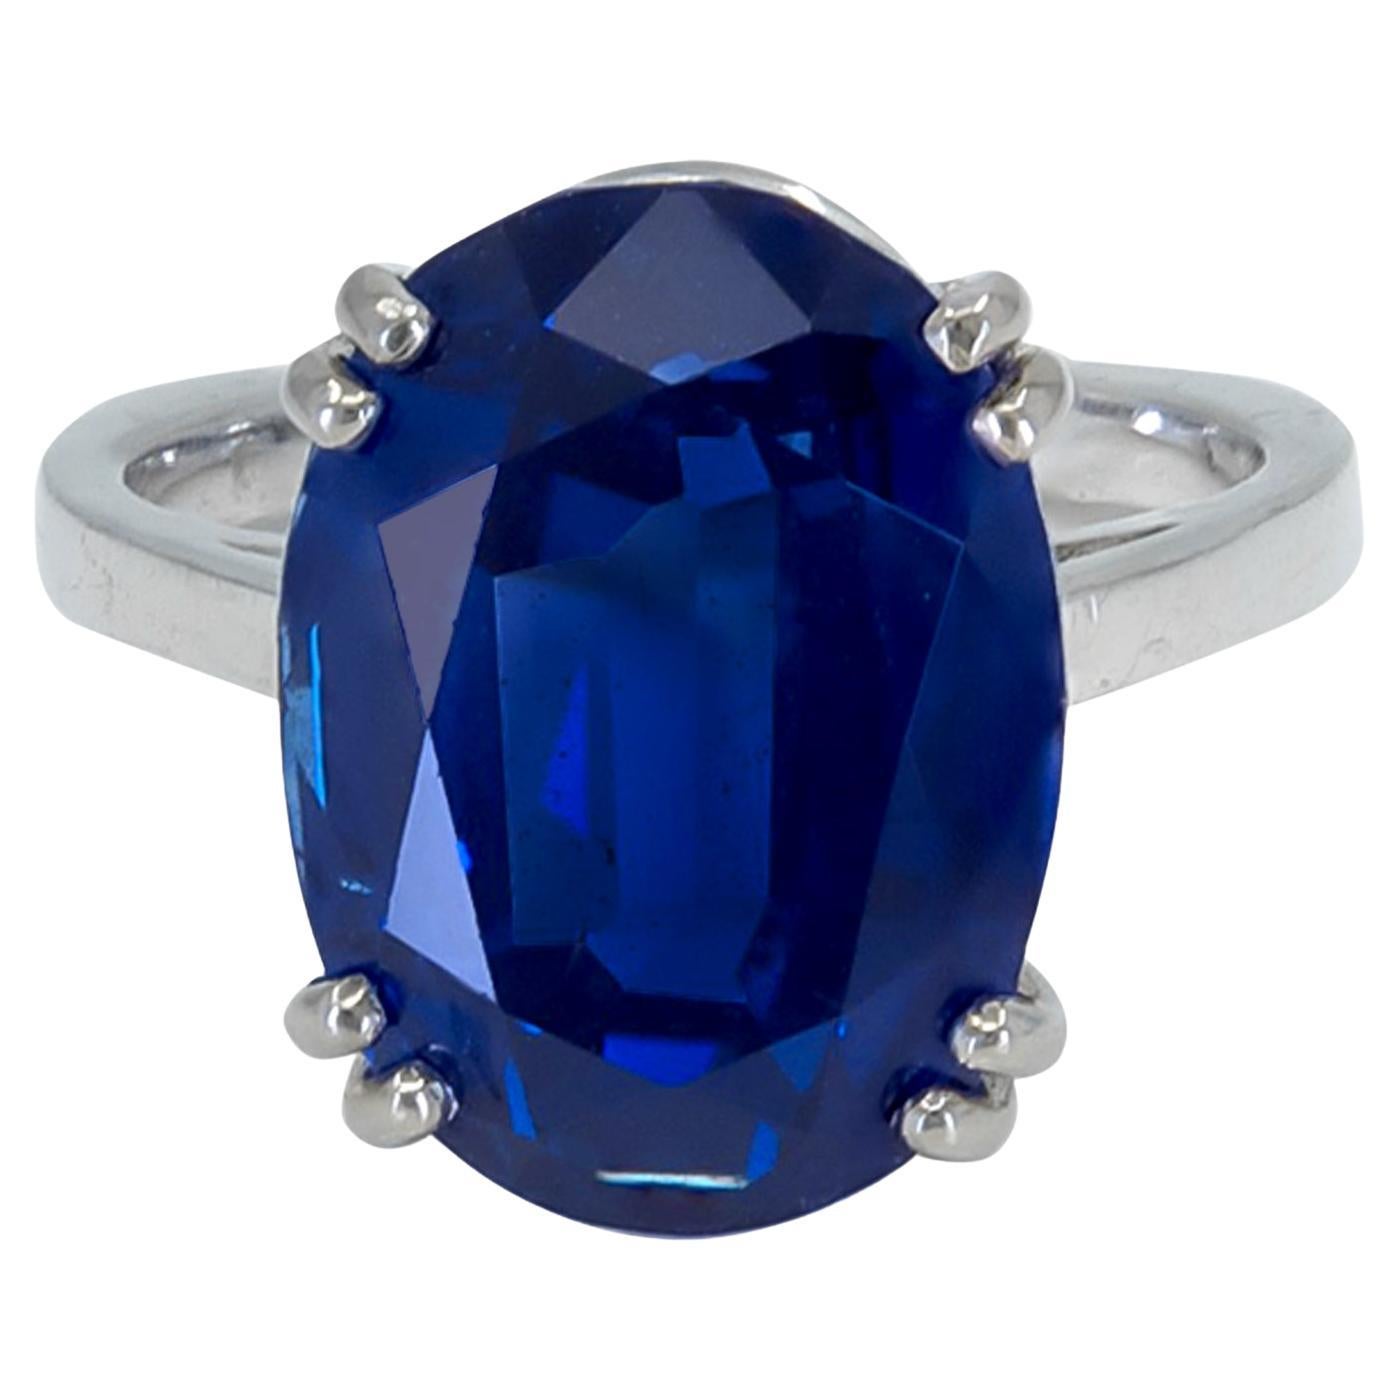 Spectra Fine Jewelry Certified 15.29 Carat Unheated Sapphire Cocktail Ring